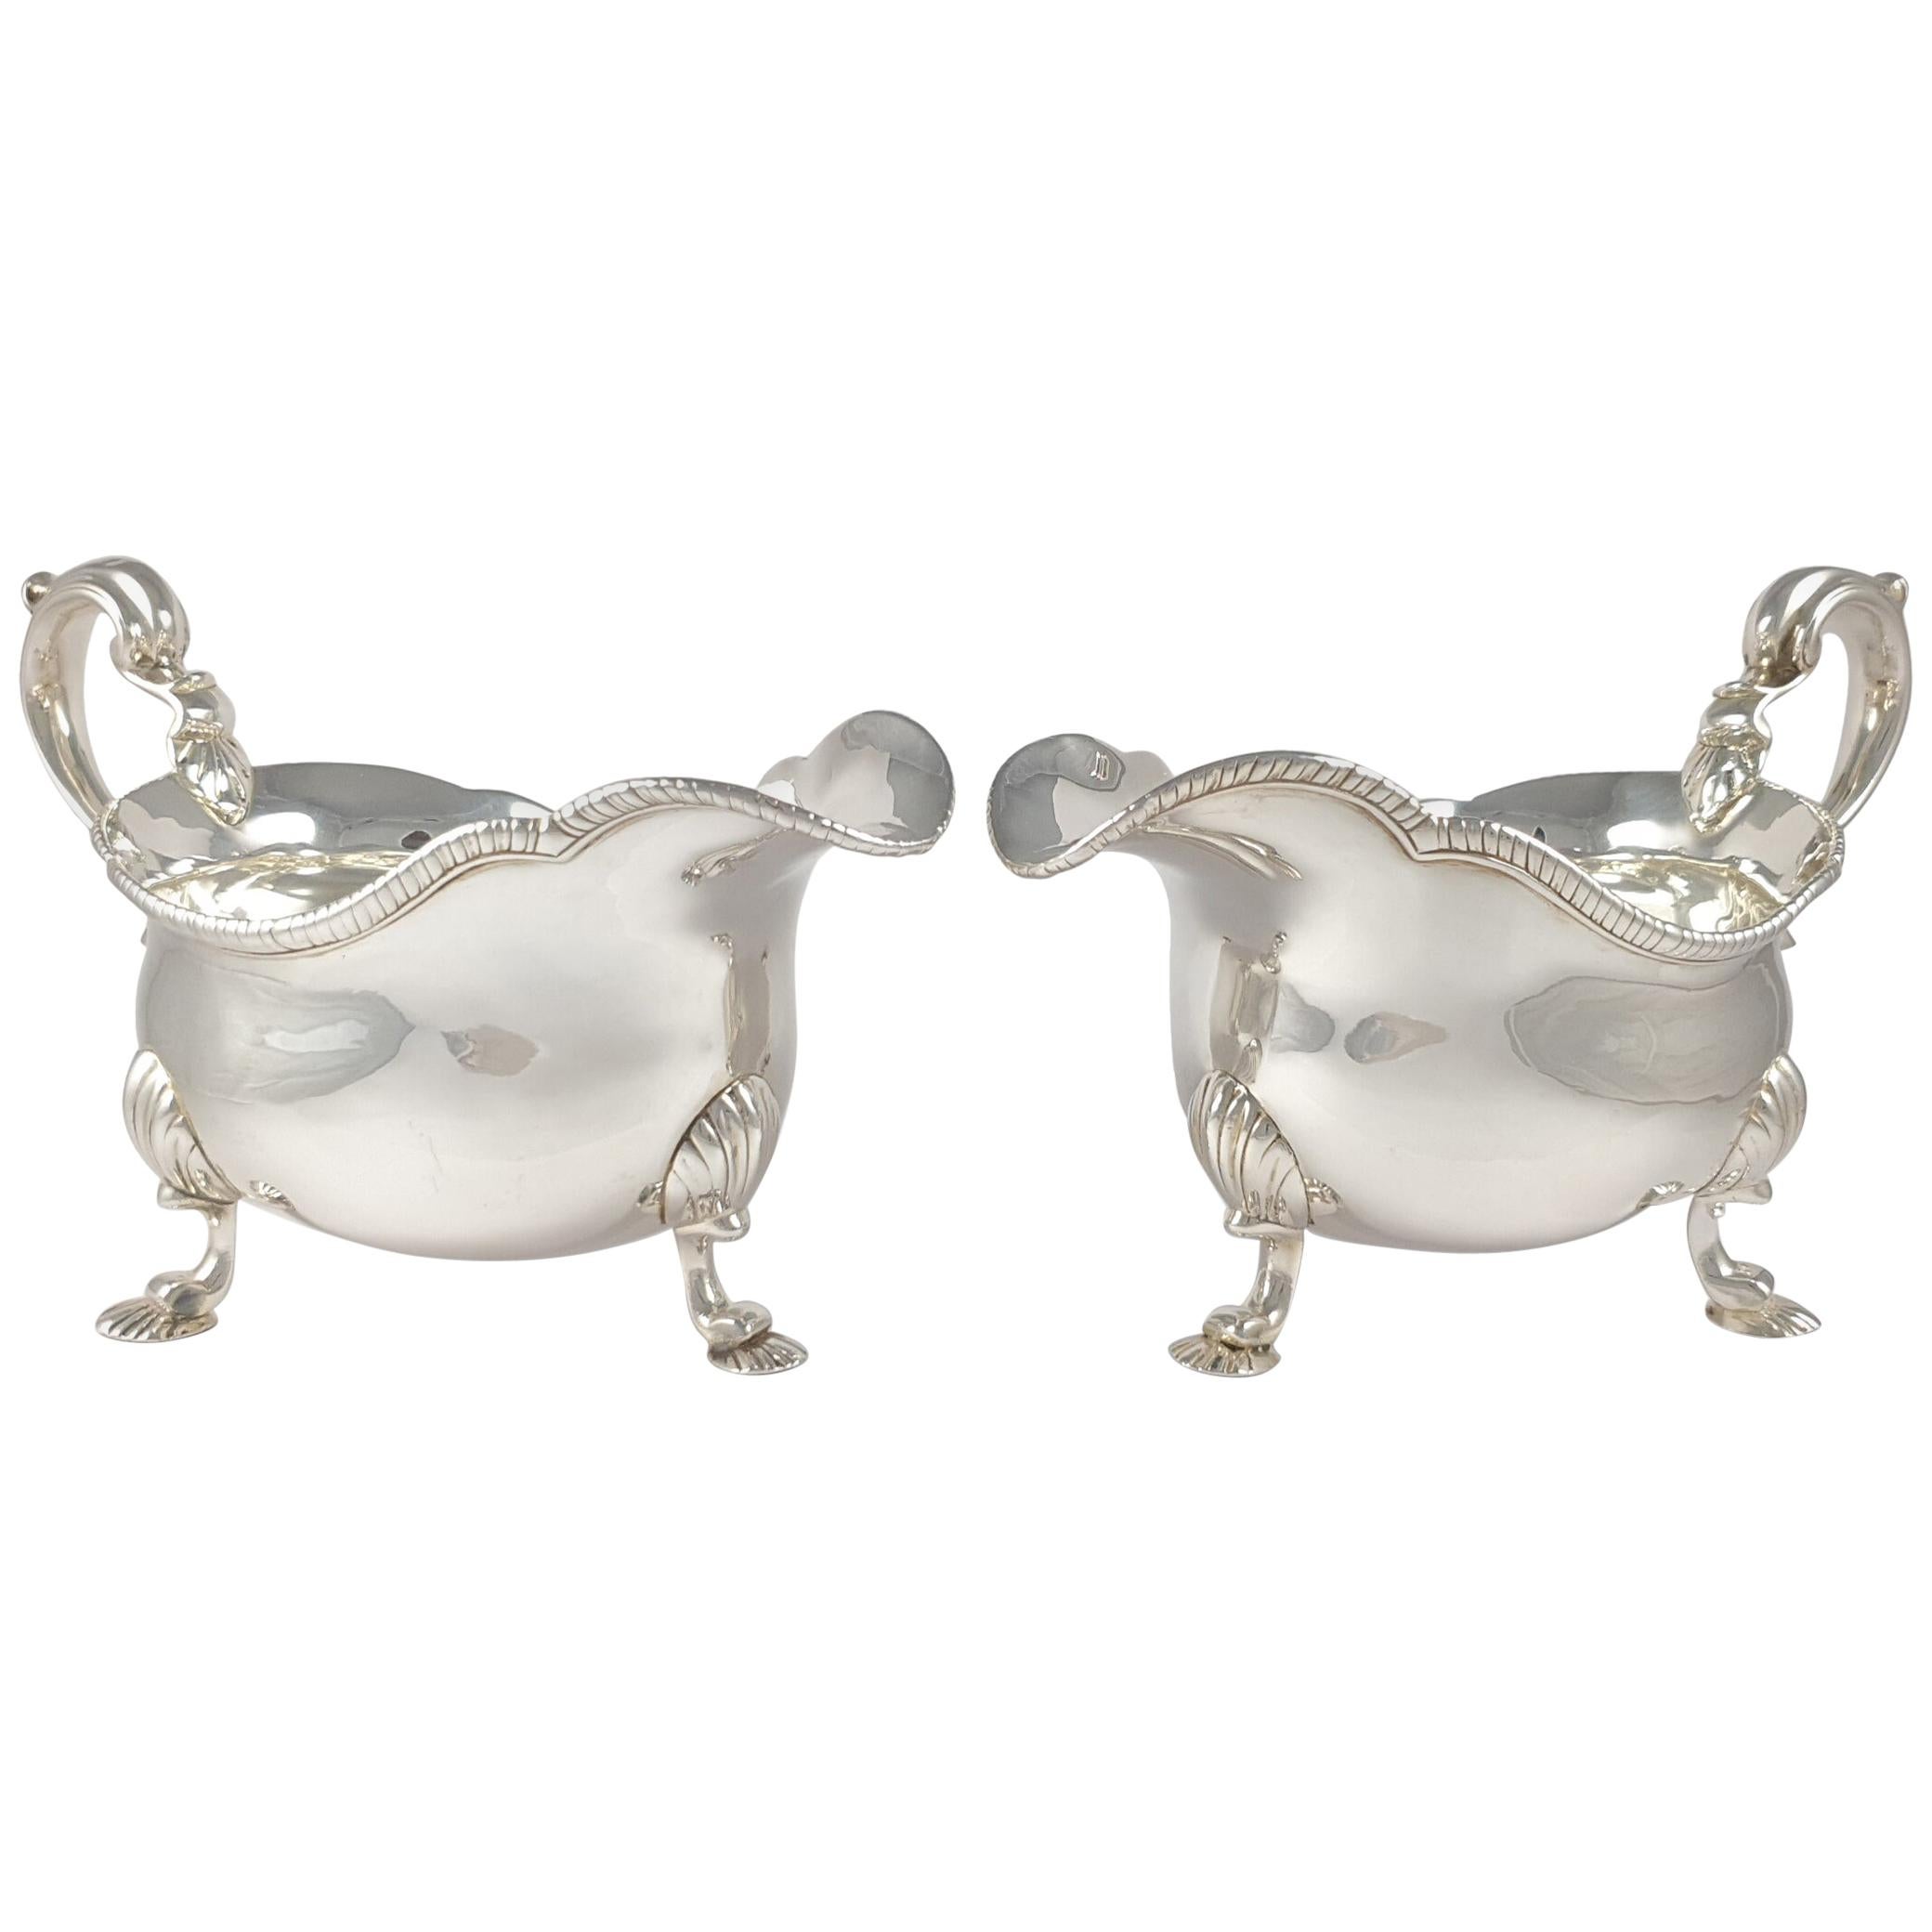 Pair of Victorian Silver Sauce Boats, D and C Houle, 1841, 1039.7 grams